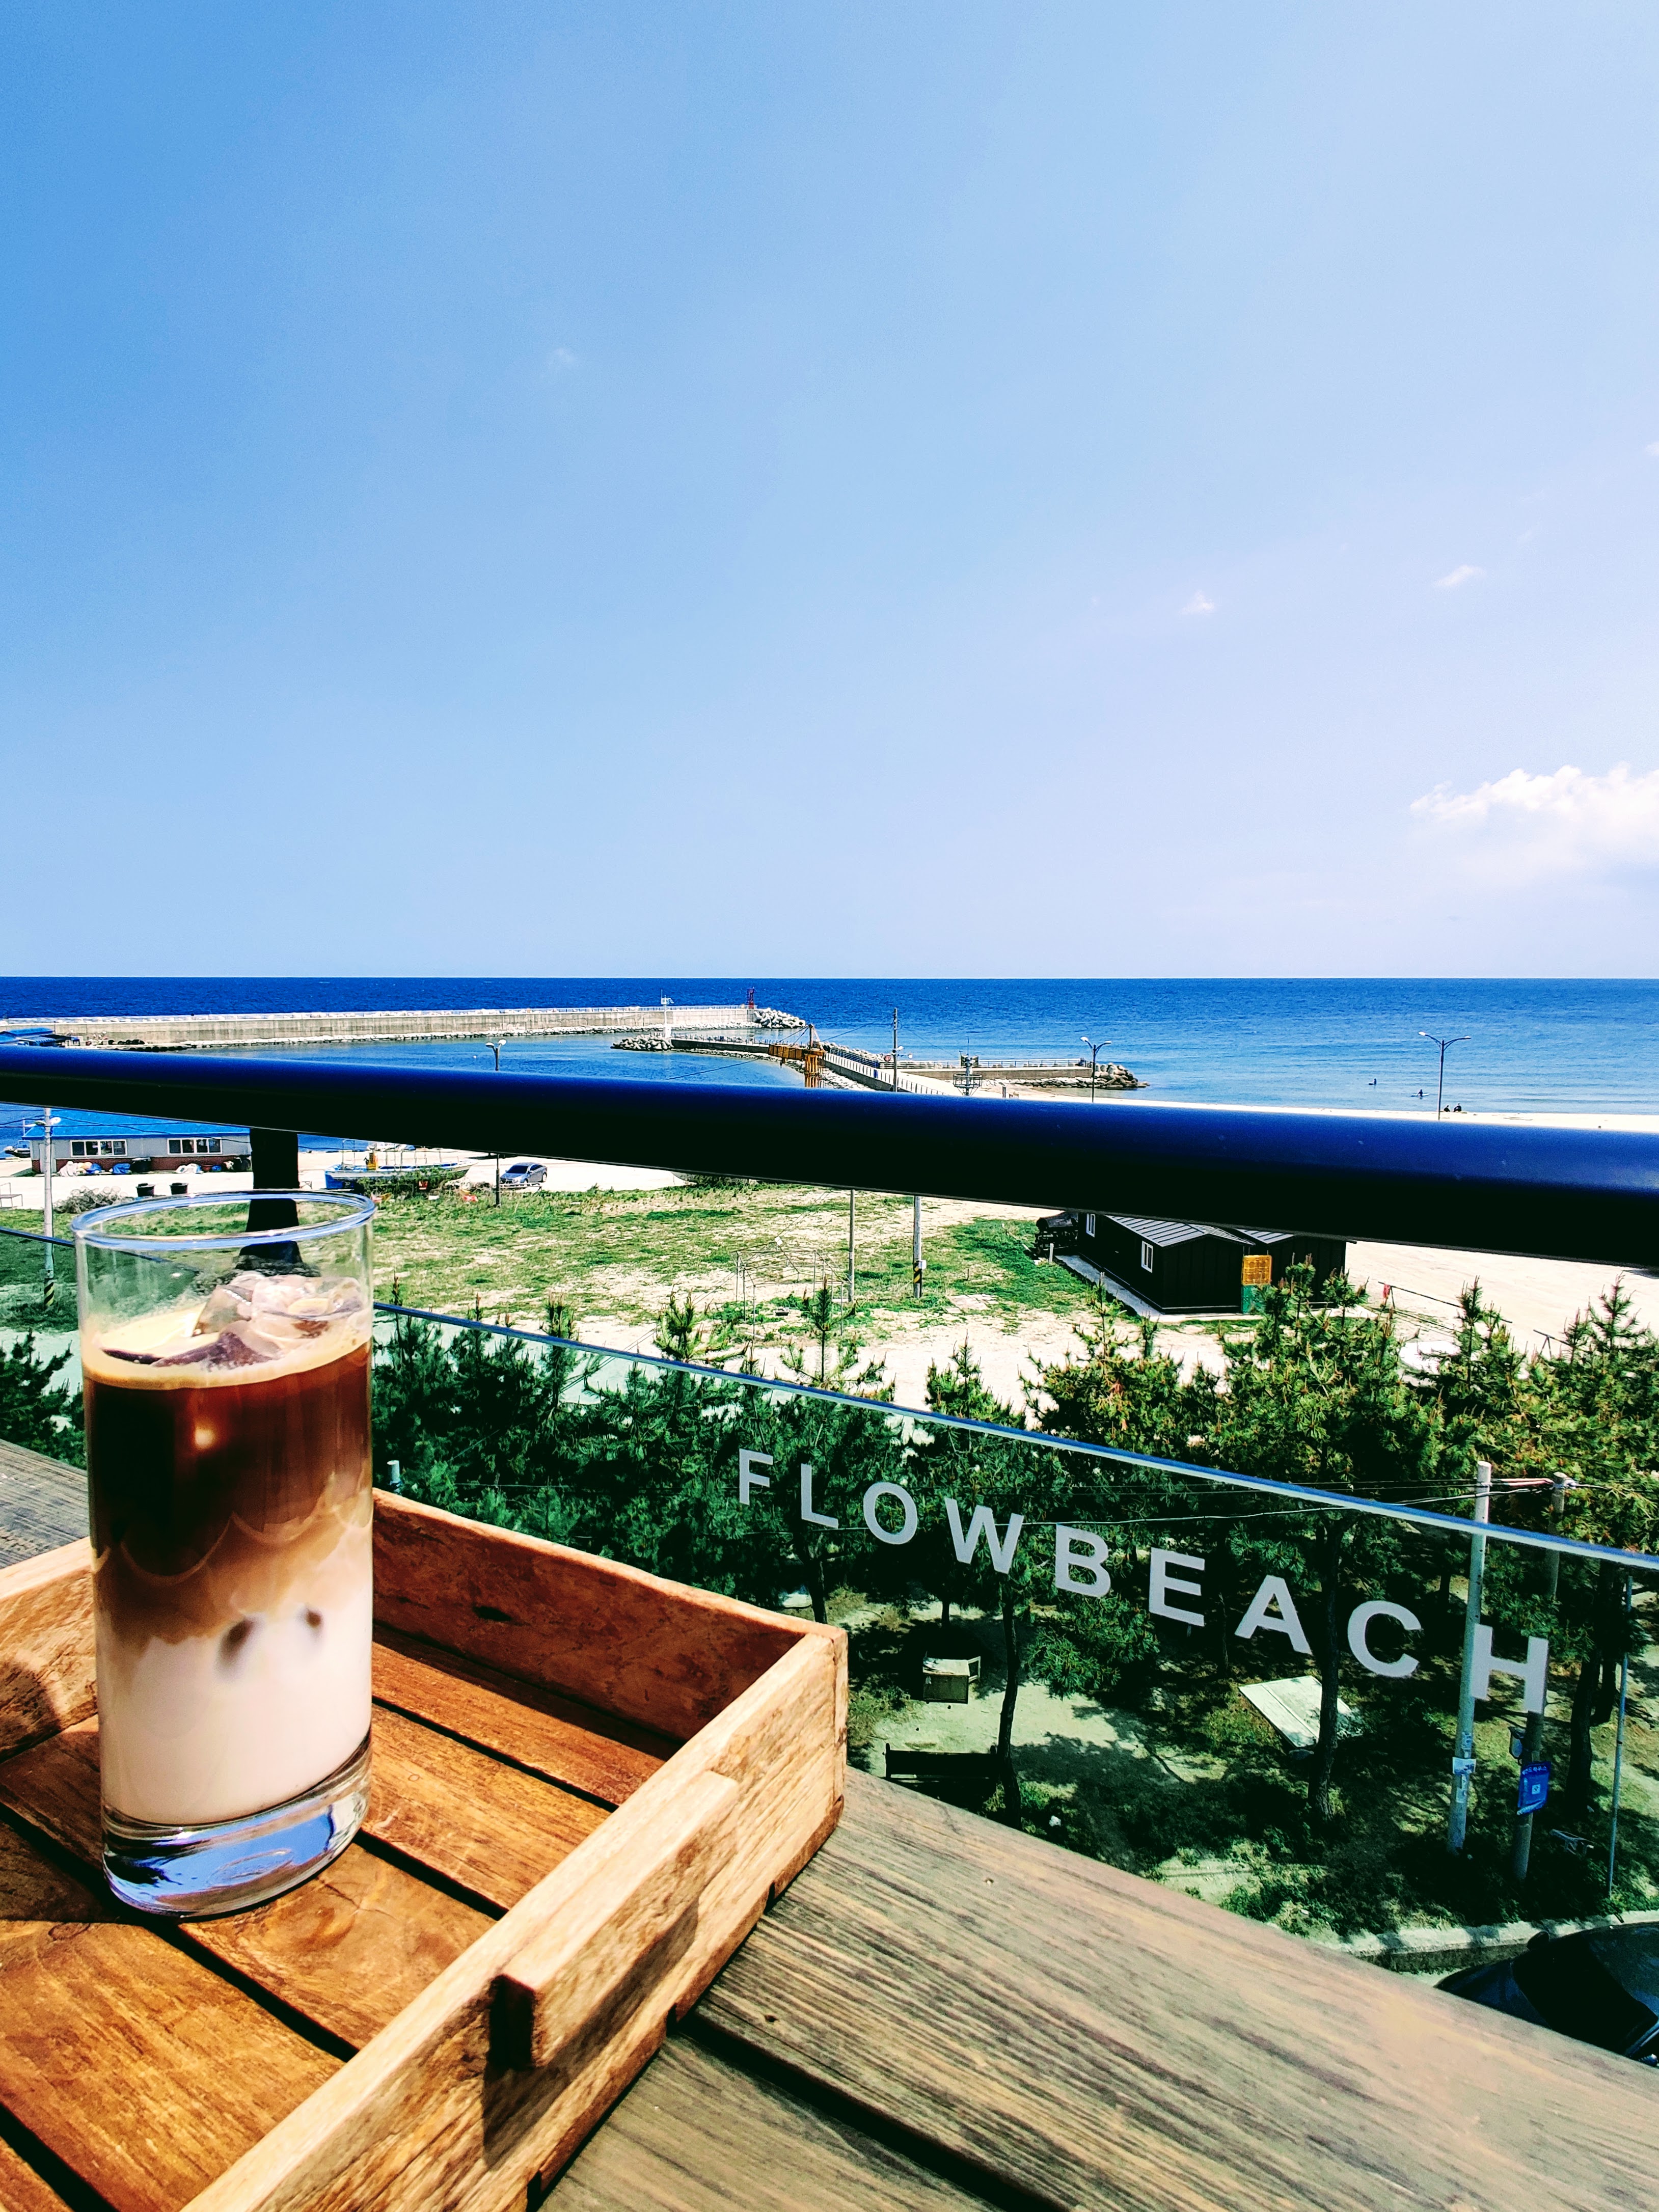 The view from Flowbeach Cafe in Yangyang, South Korea